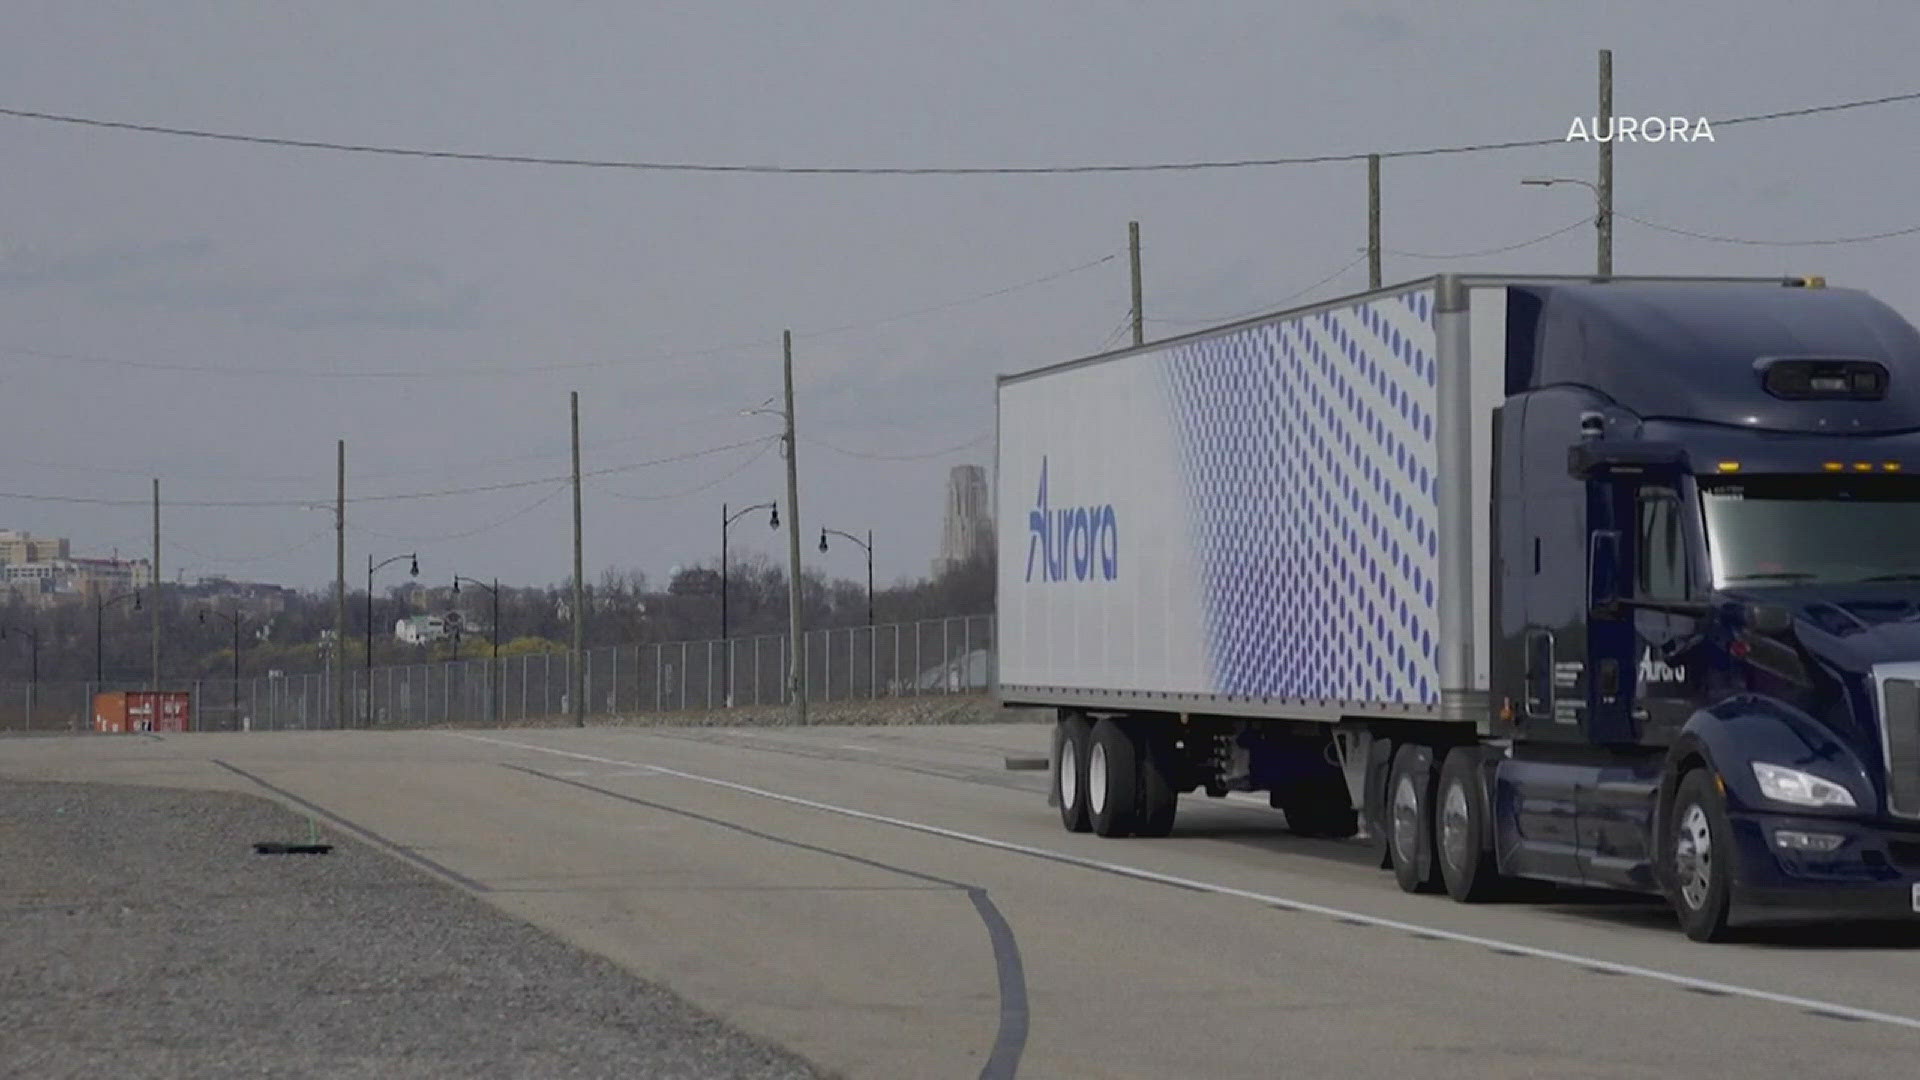 Within three or four years, Aurora and its competitors expect to put thousands self-driving trucks on America's public freeways.